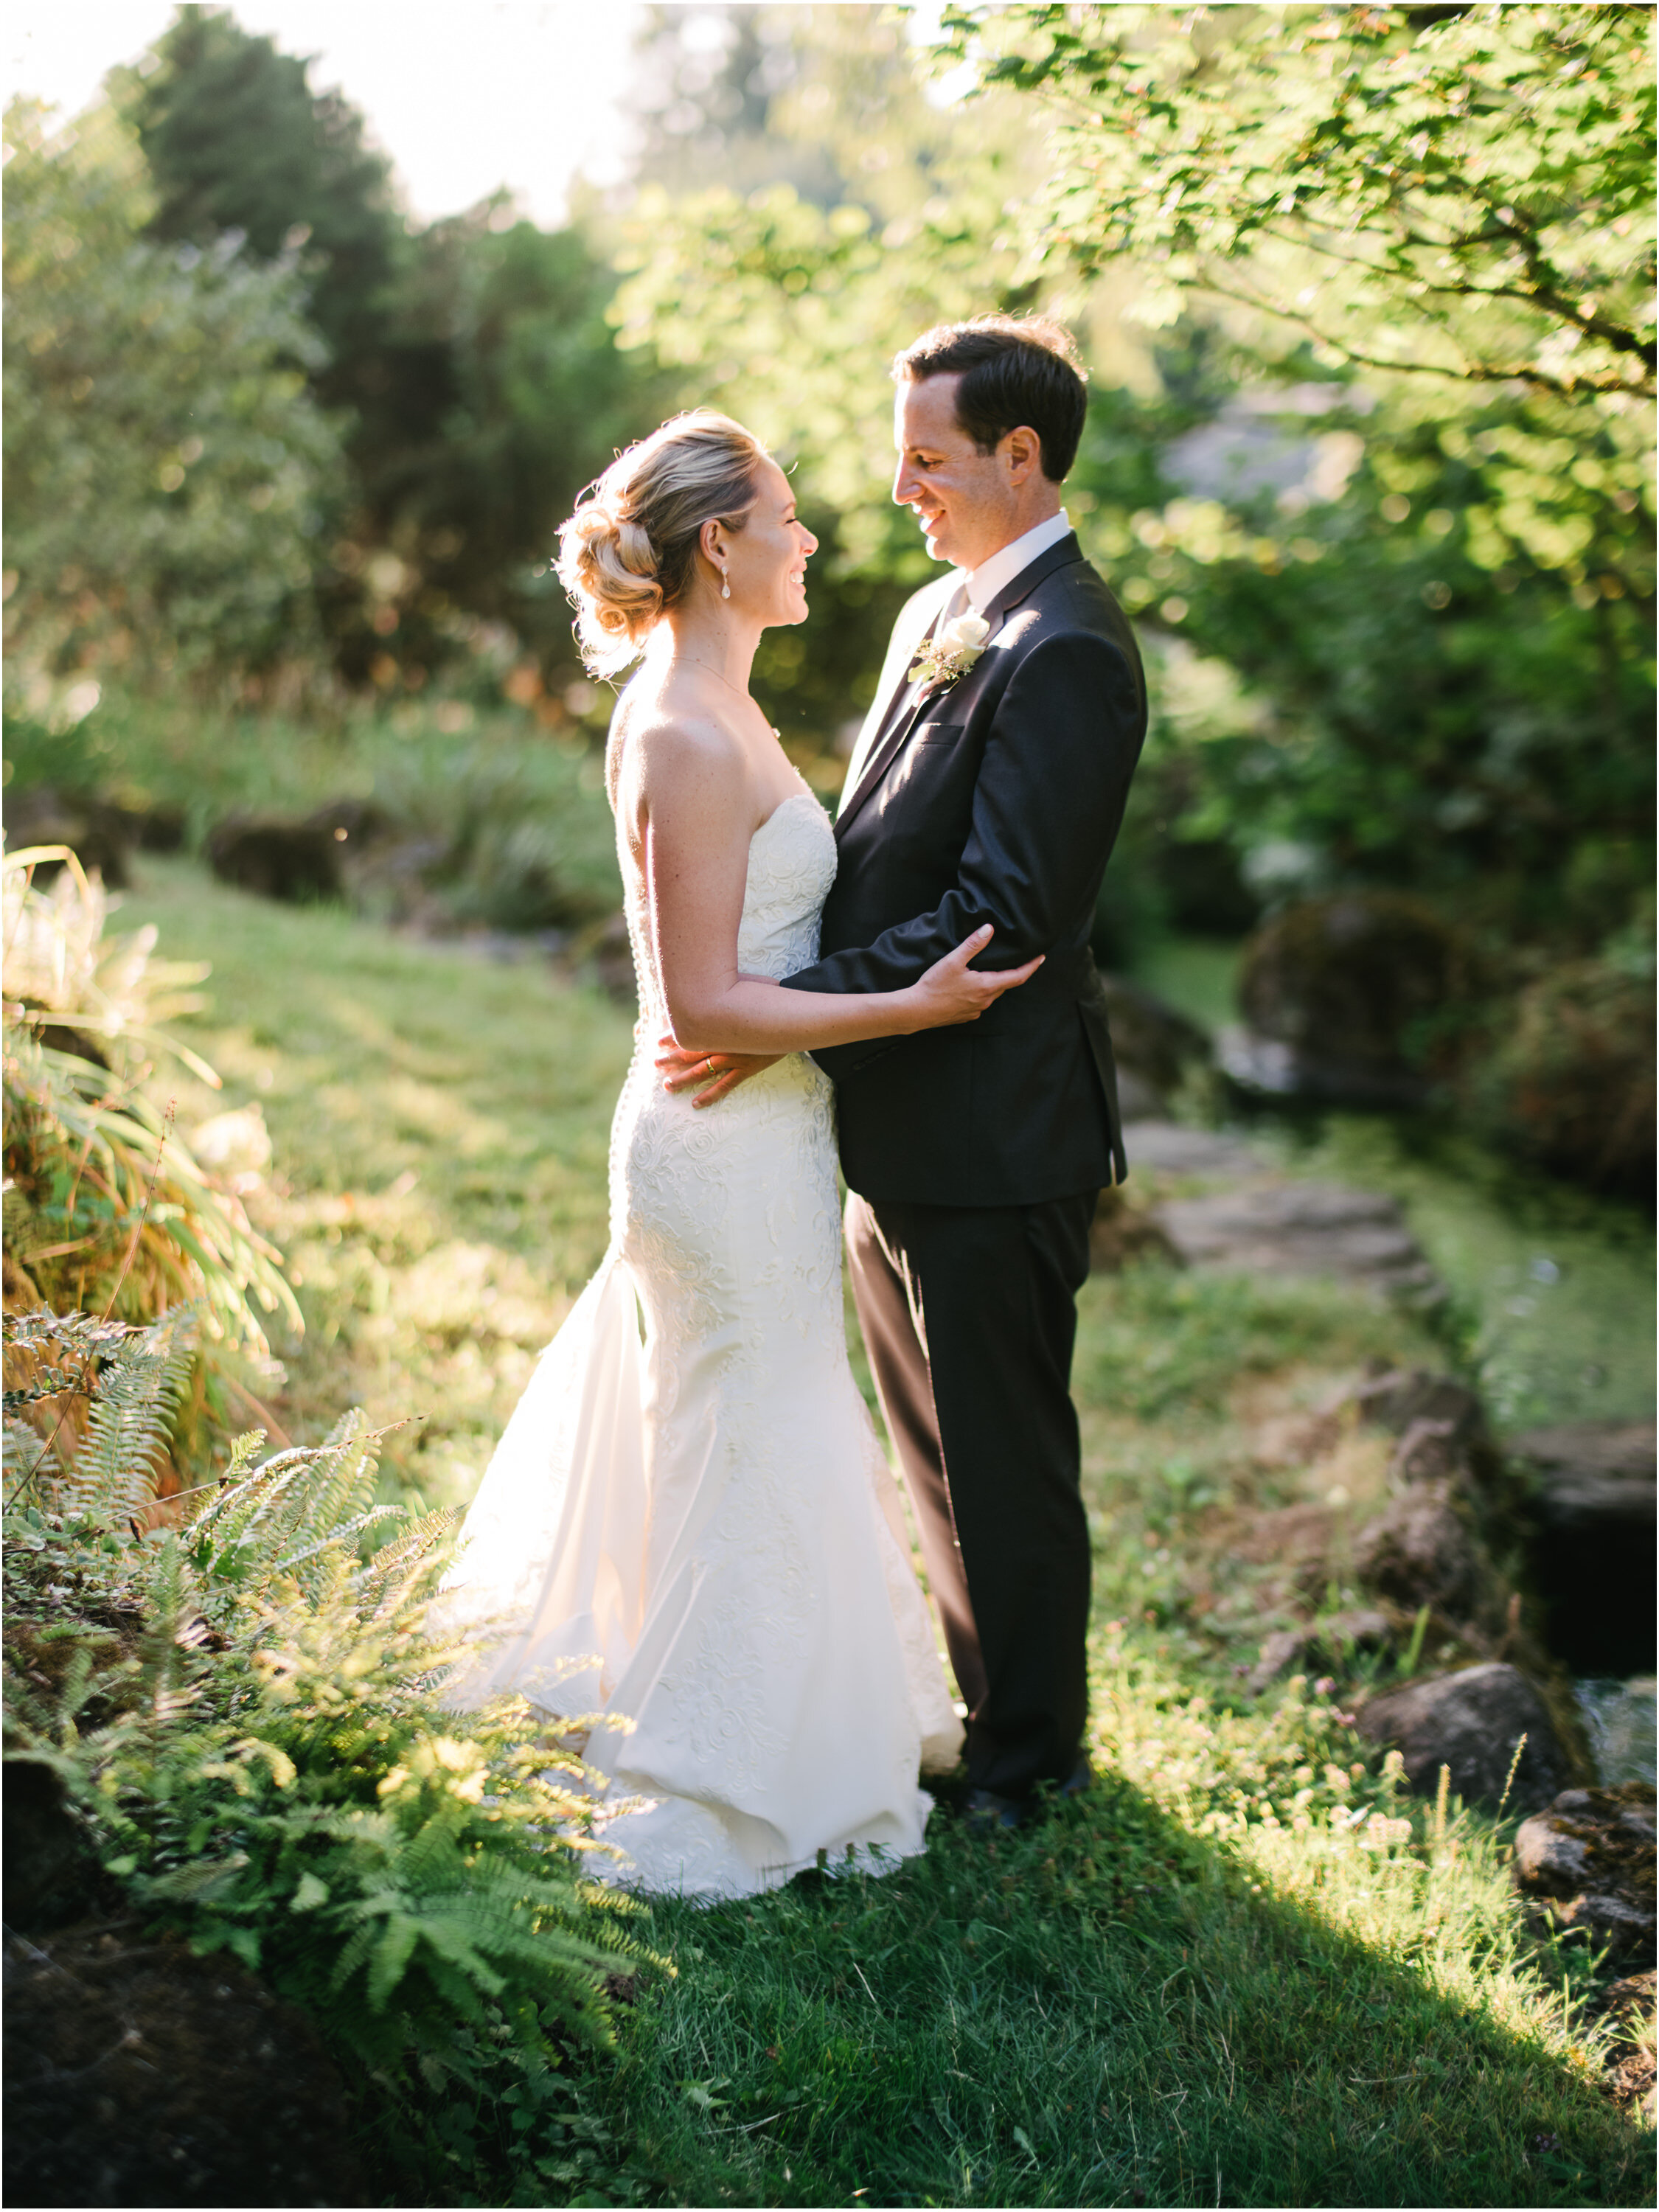  Bride and groom standing by pond backlit by sunlight at menucha retreat center 